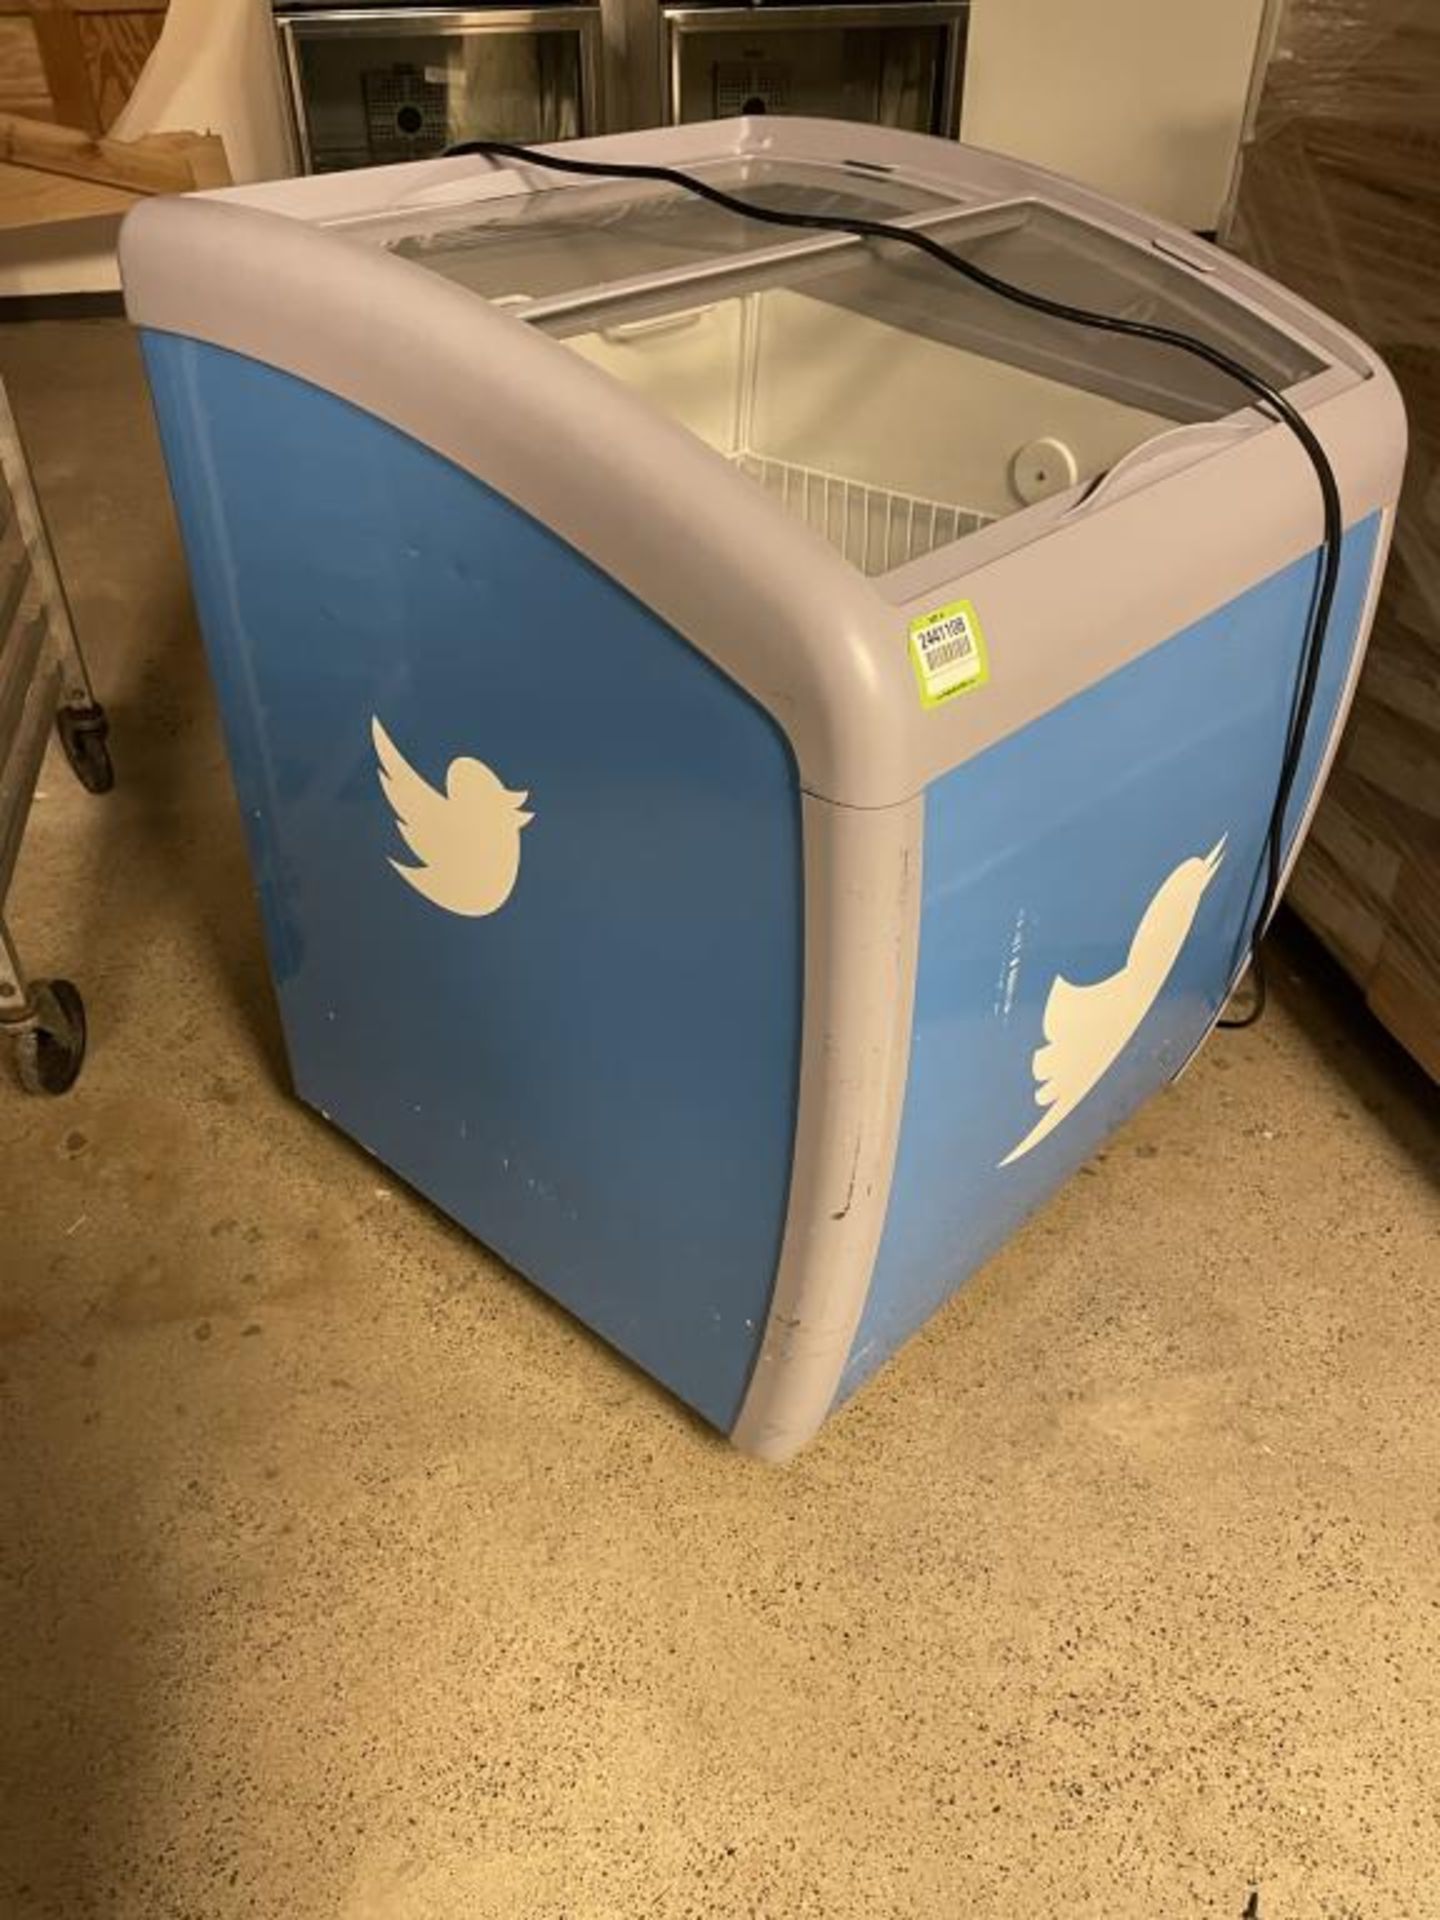 Twitter Branded Curved Top Display Ice Cream Freezer - Image 2 of 11